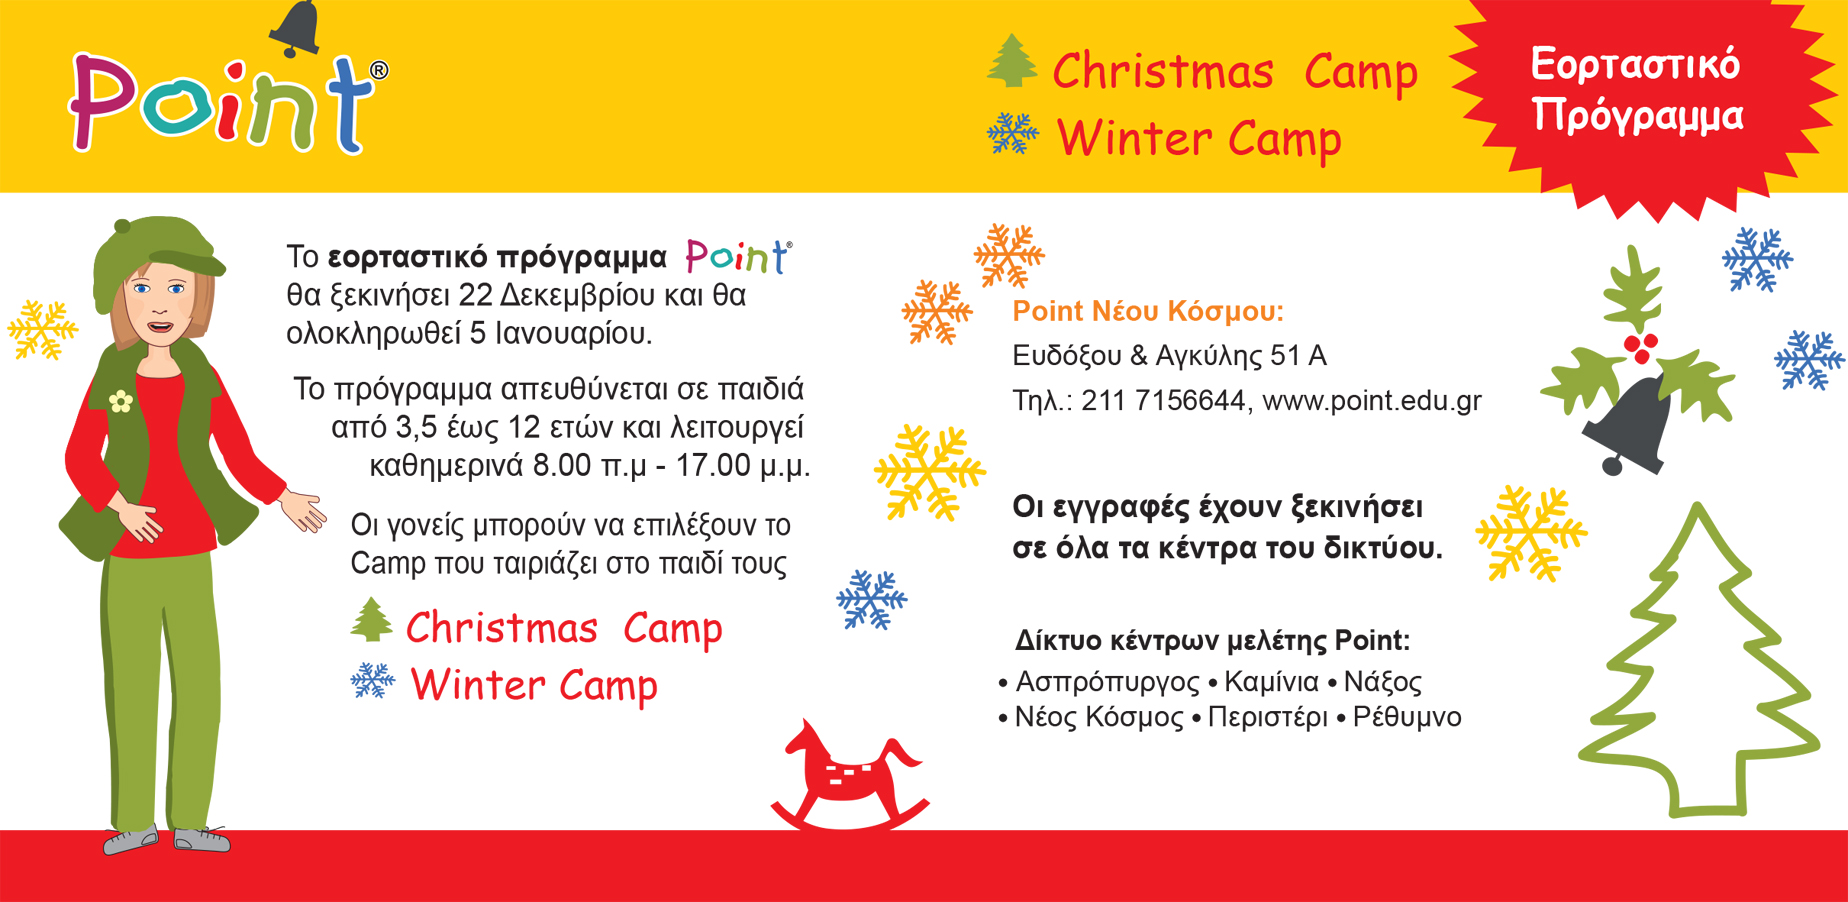 Point: Christmas Camp - Winter Camp